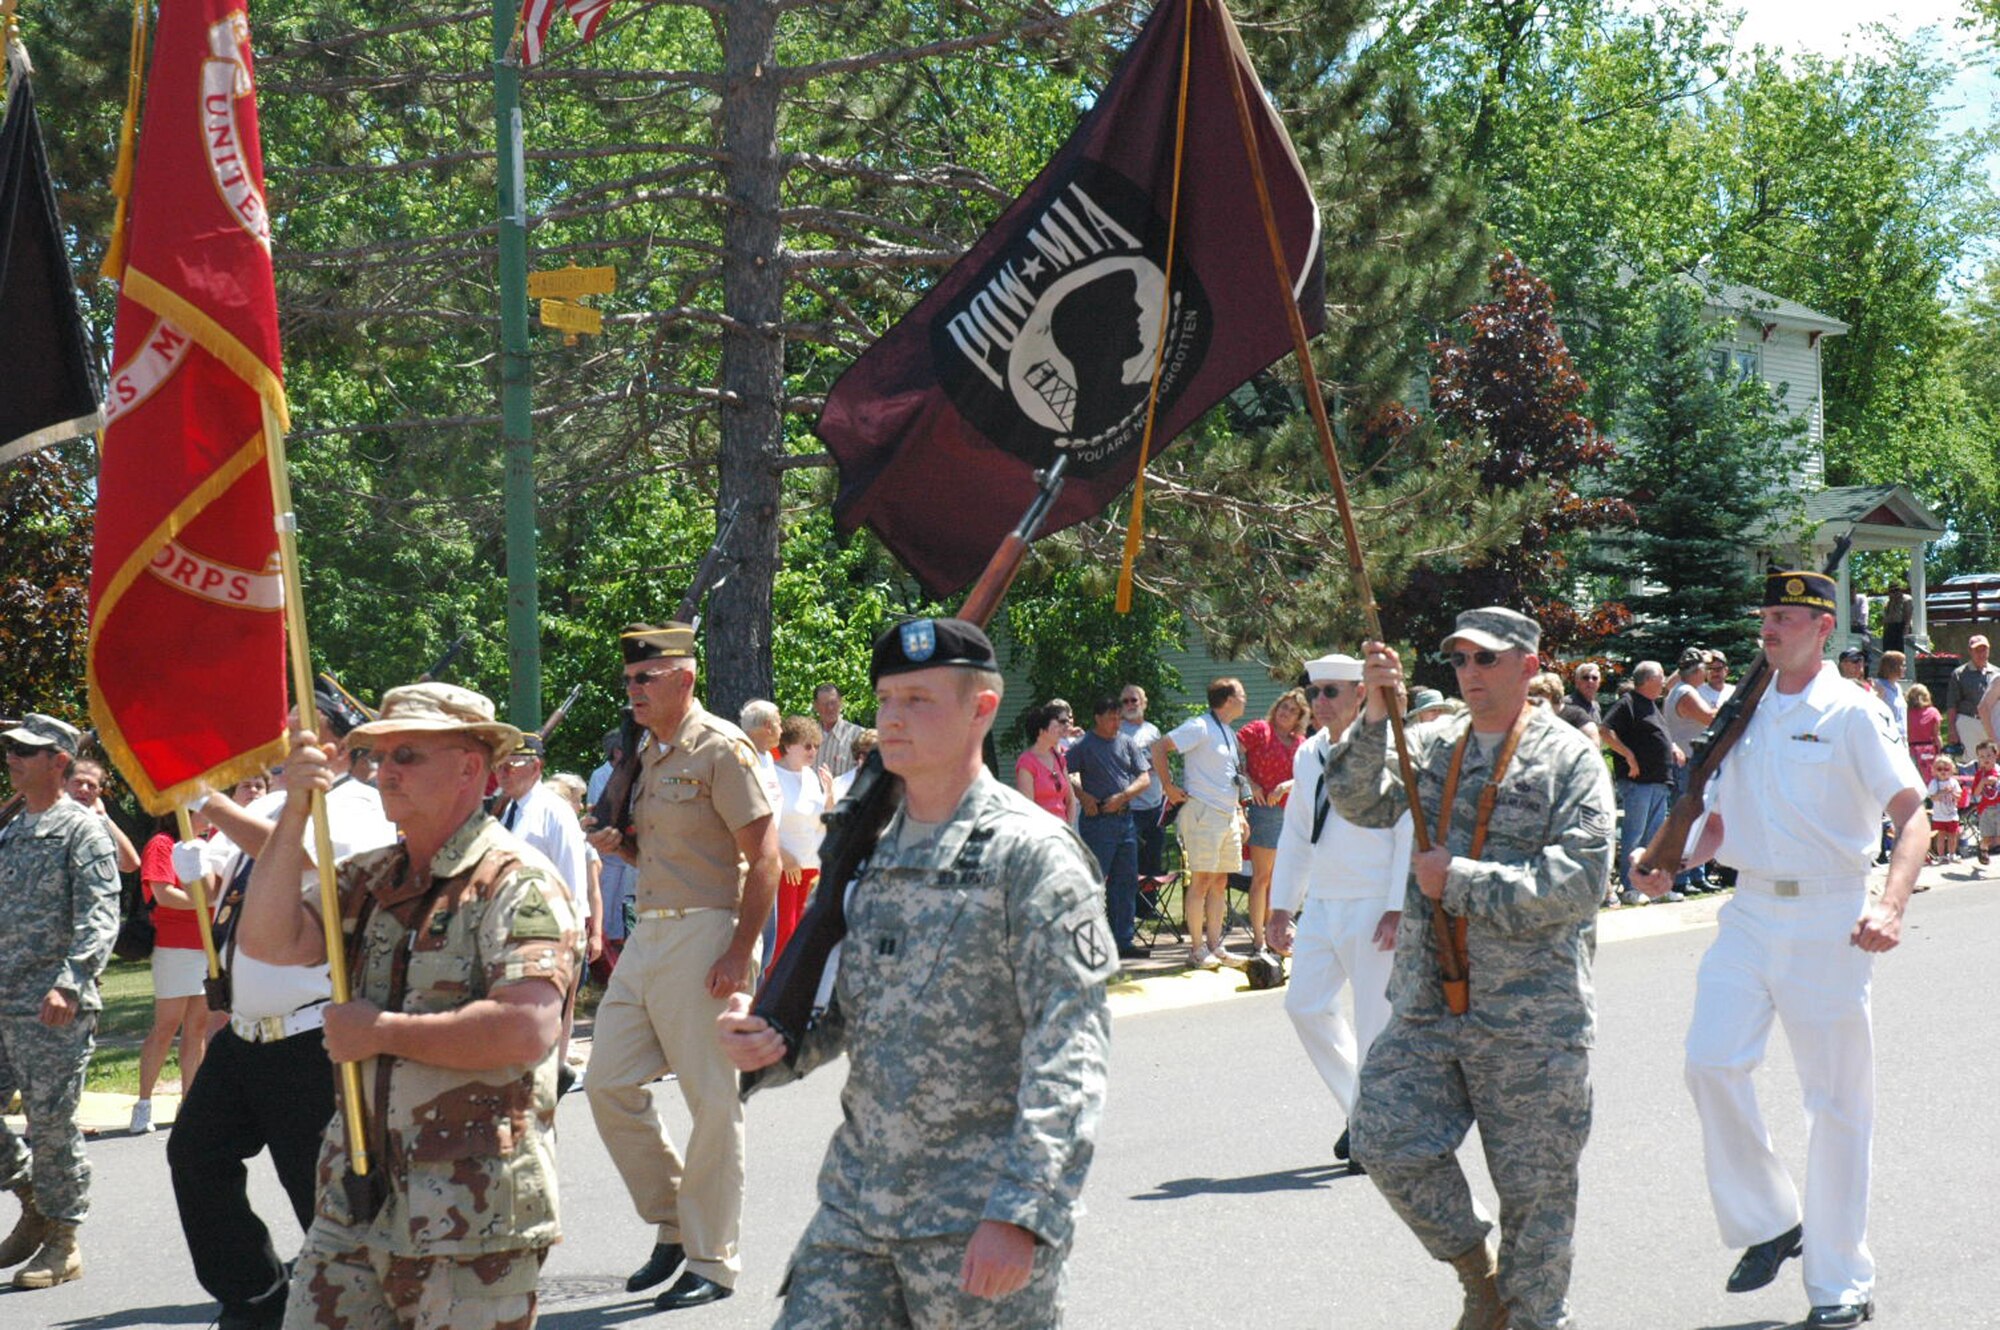 Members of the Veterans of Foreign Wars Post 9084 Color Guard march down Main Street of Wakefield, Mich., leading the Independence Day Parade July 4, 2008.  (U.S. Air Force Photo/Bobbi Sturkol)